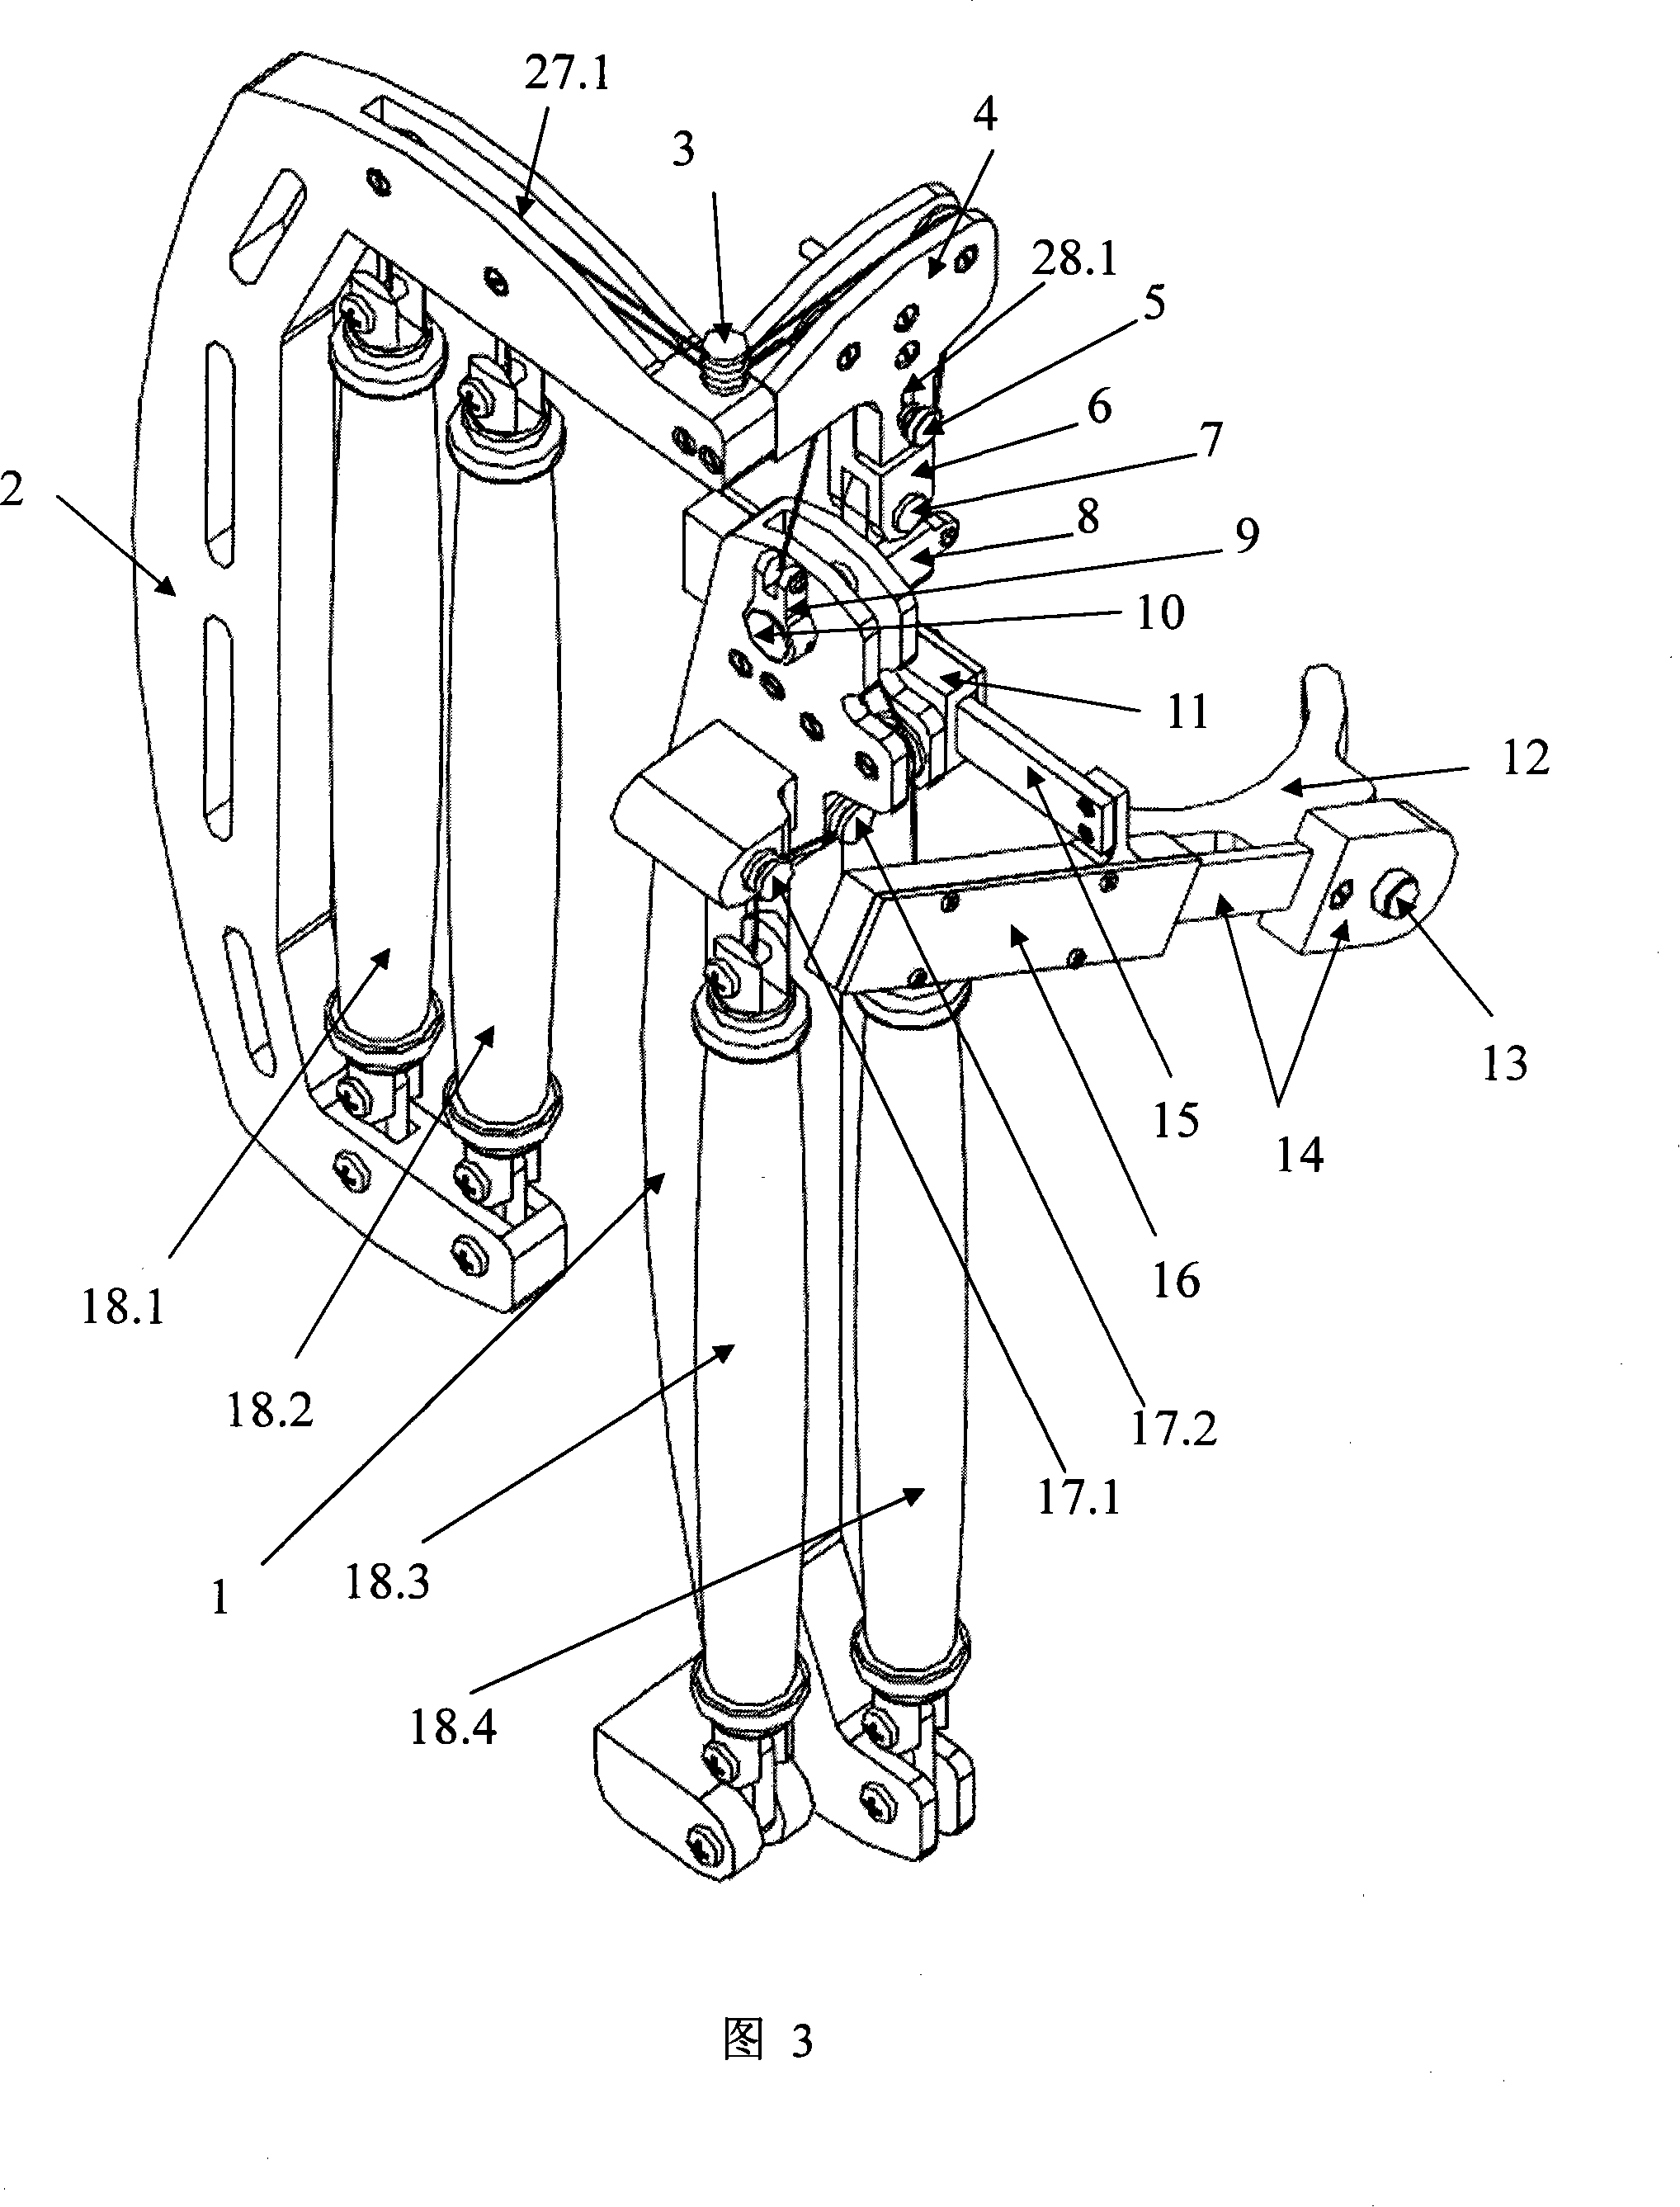 Device for healing and training shoulder joint